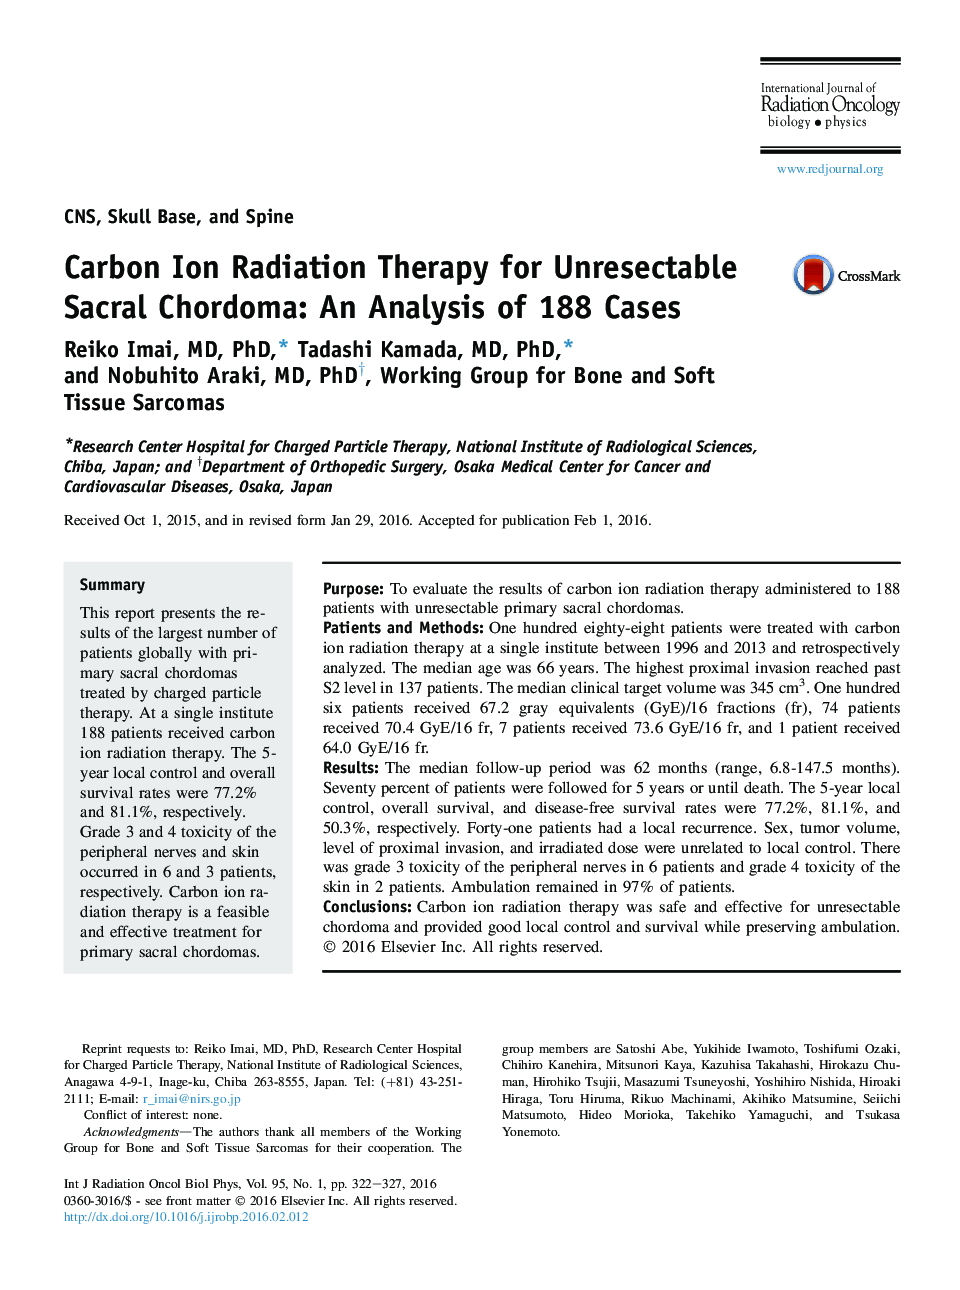 Carbon Ion Radiation Therapy for Unresectable Sacral Chordoma: An Analysis of 188 Cases